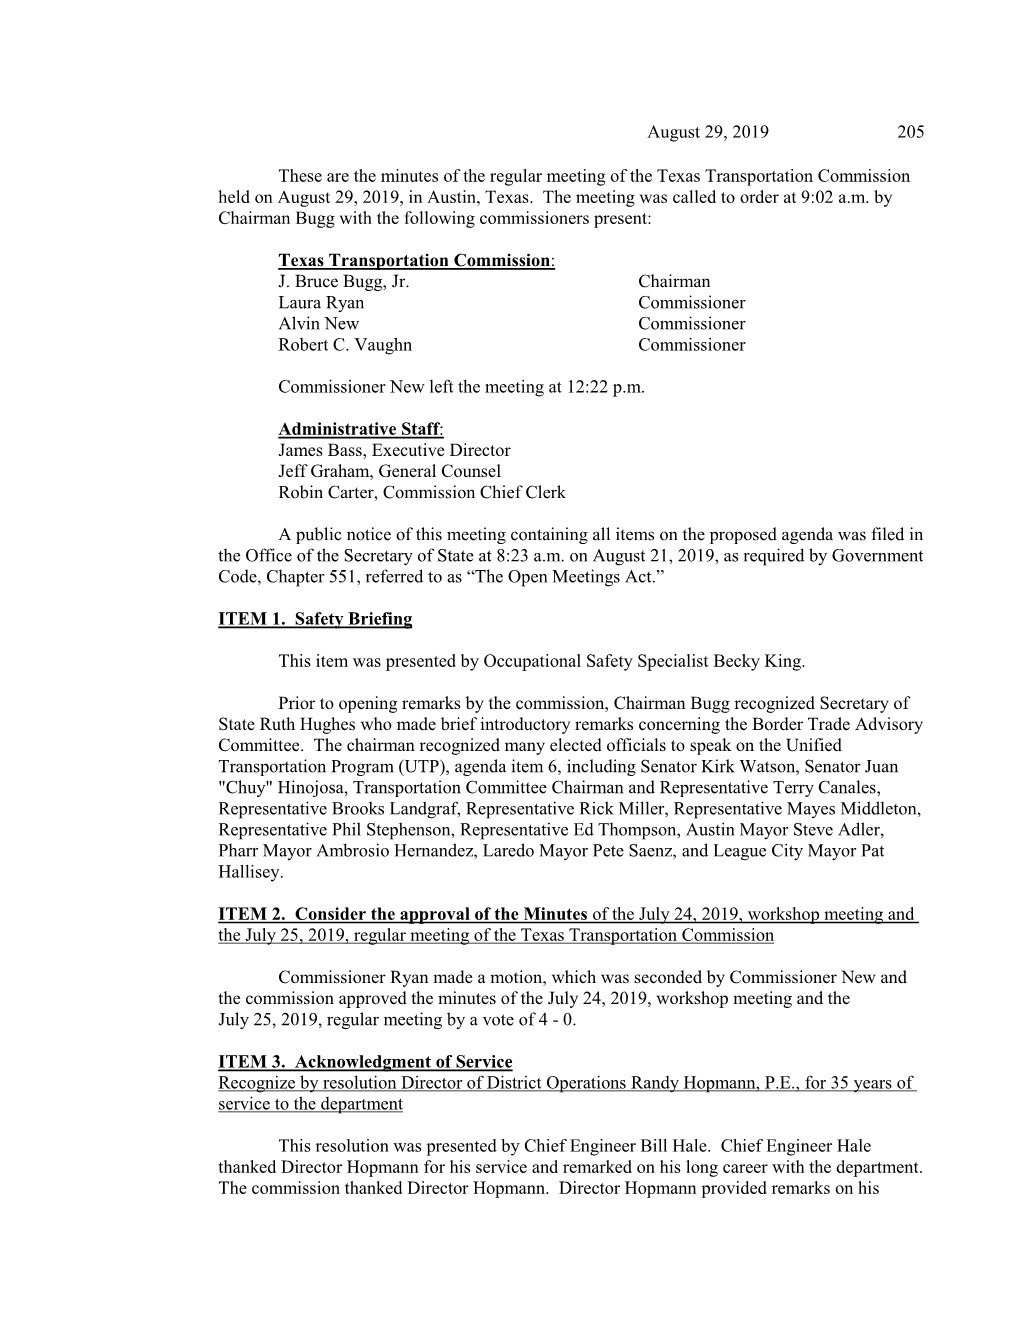 Minutes of the Regular Meeting of the Texas Transportation Commission Held on August 29, 2019, in Austin, Texas